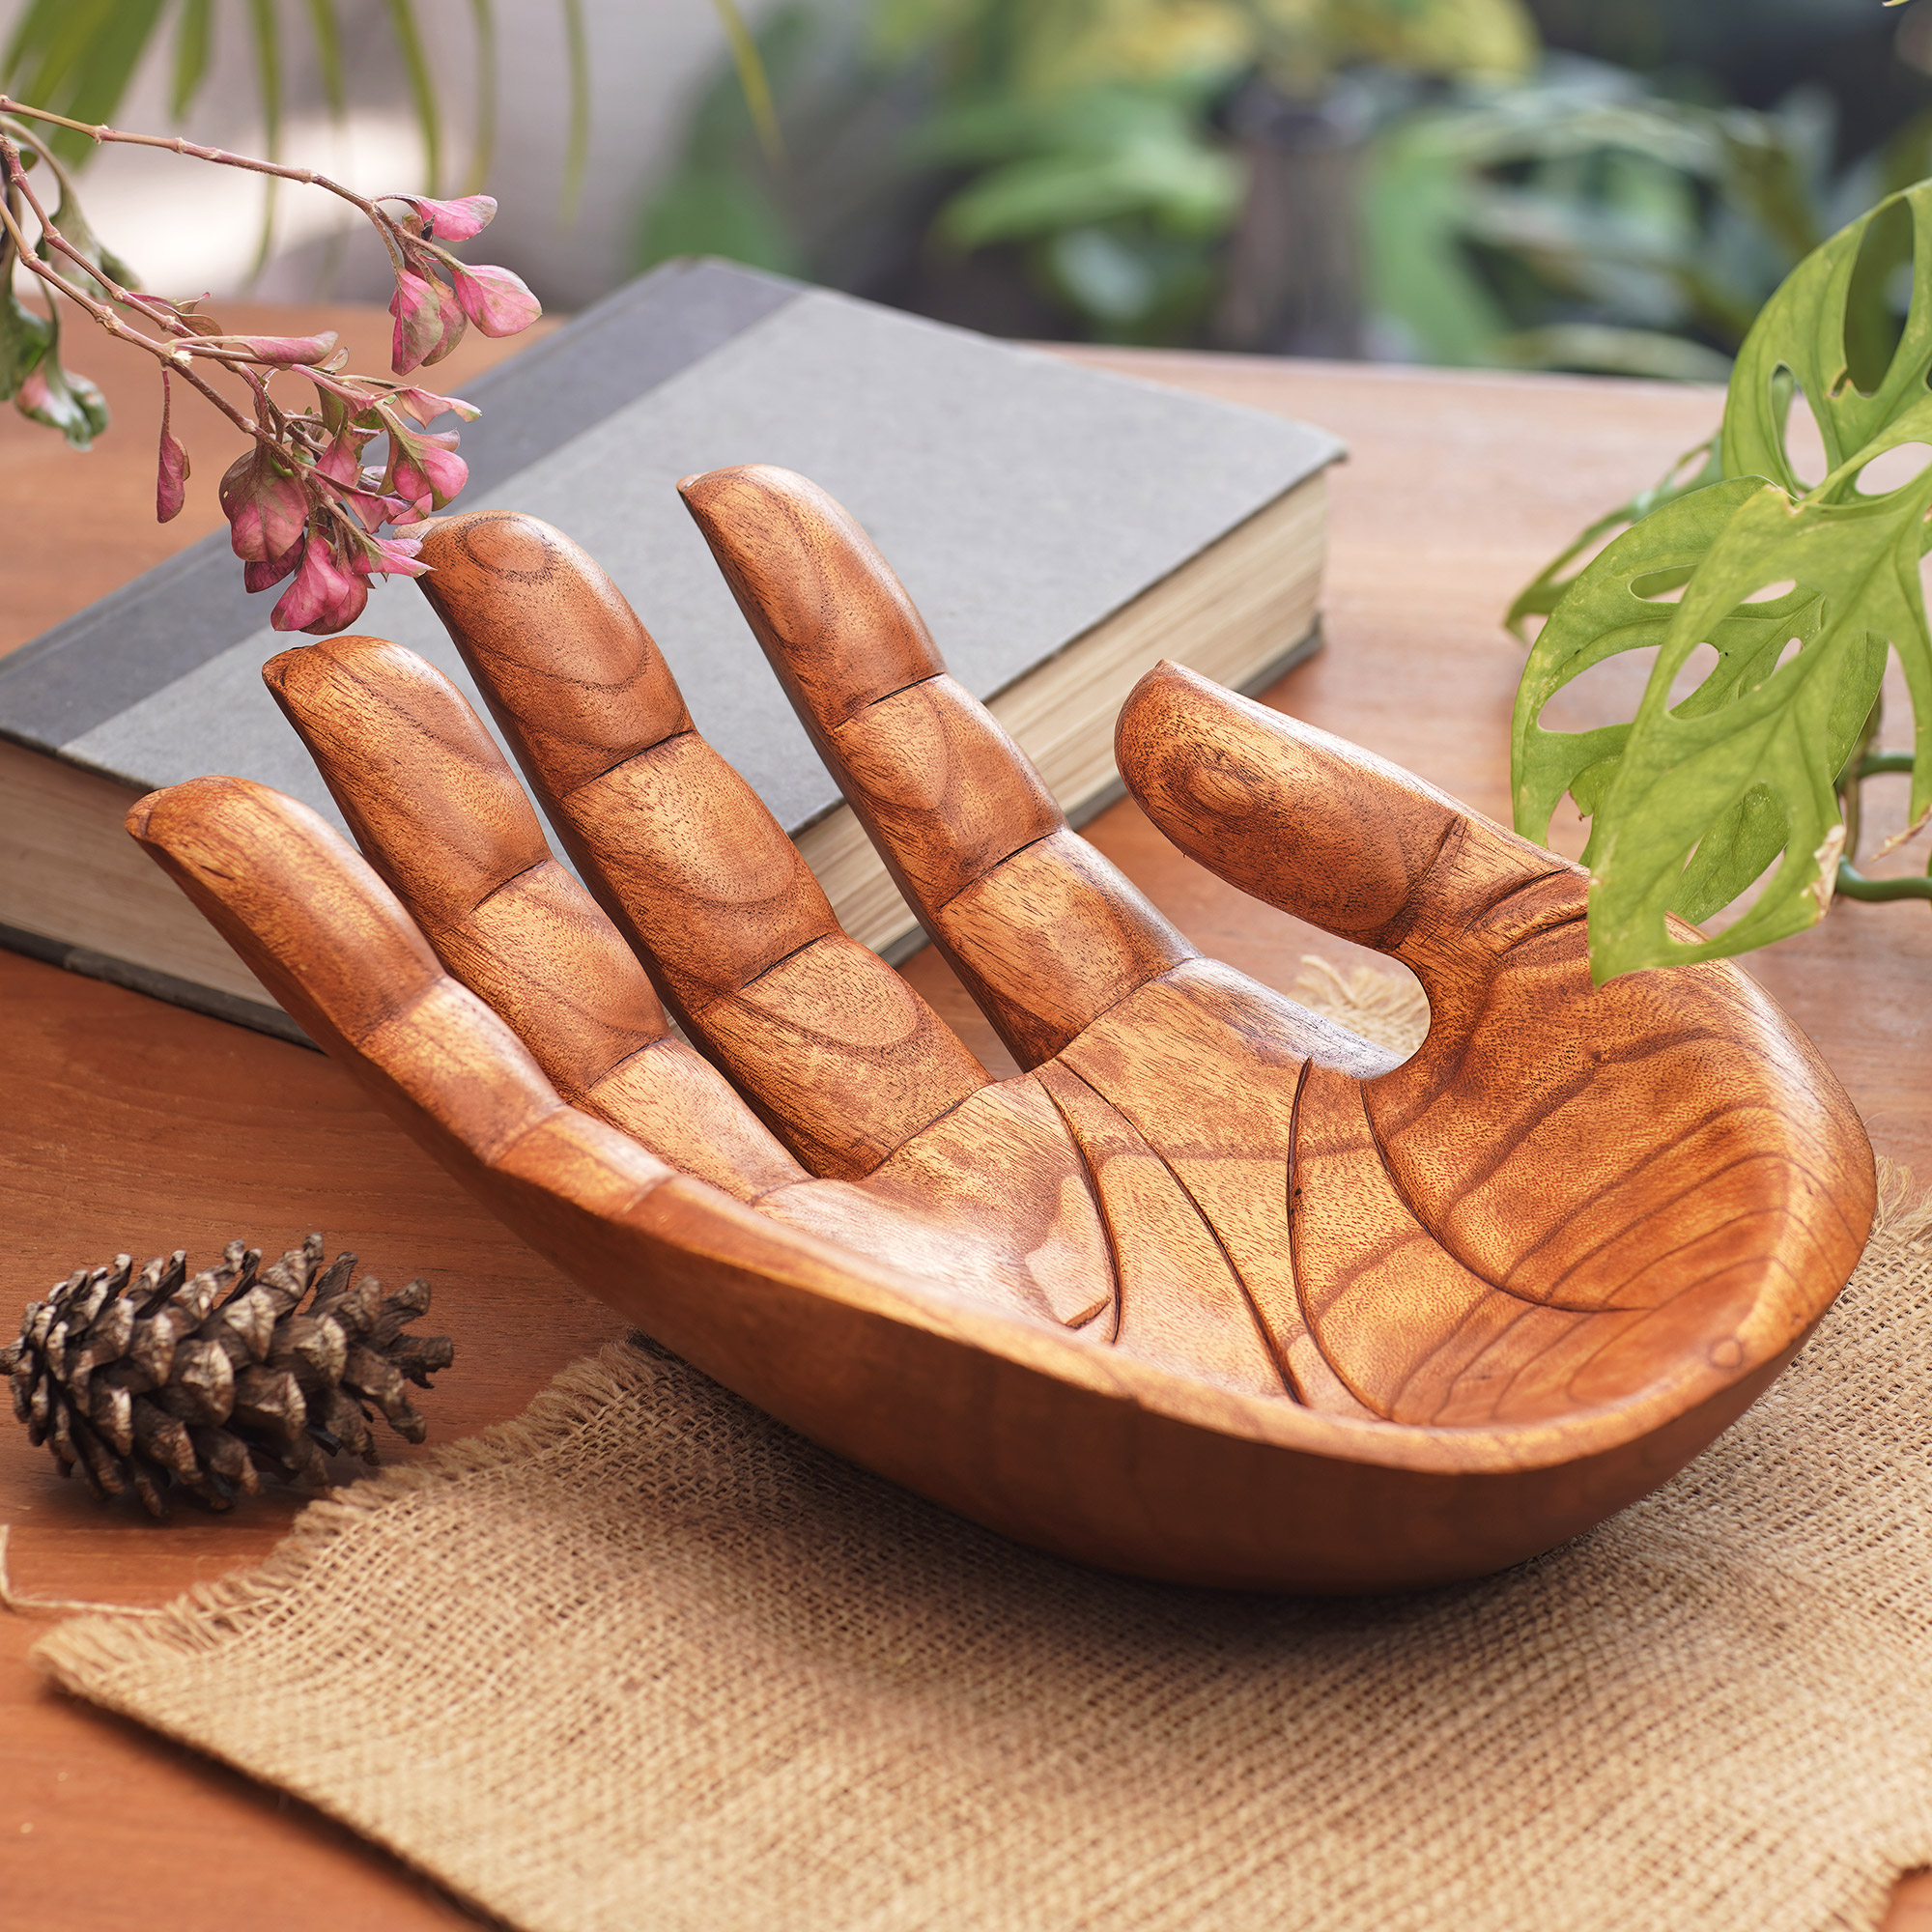 Signed Handcarved Wood Hand Sculpture from Bali - Praise and